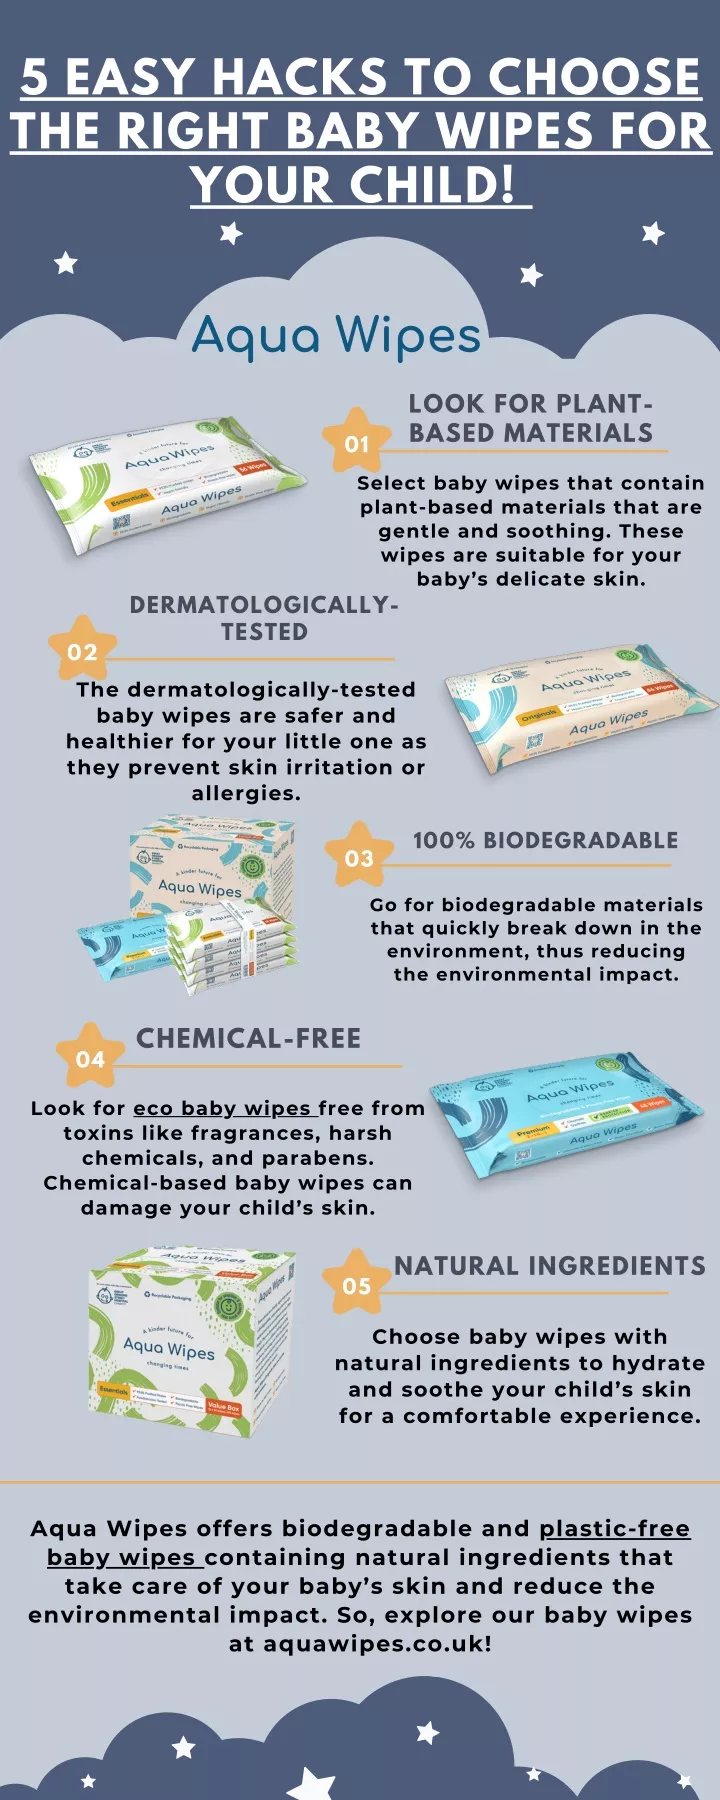 5 easy hacks to choose the right baby wipes